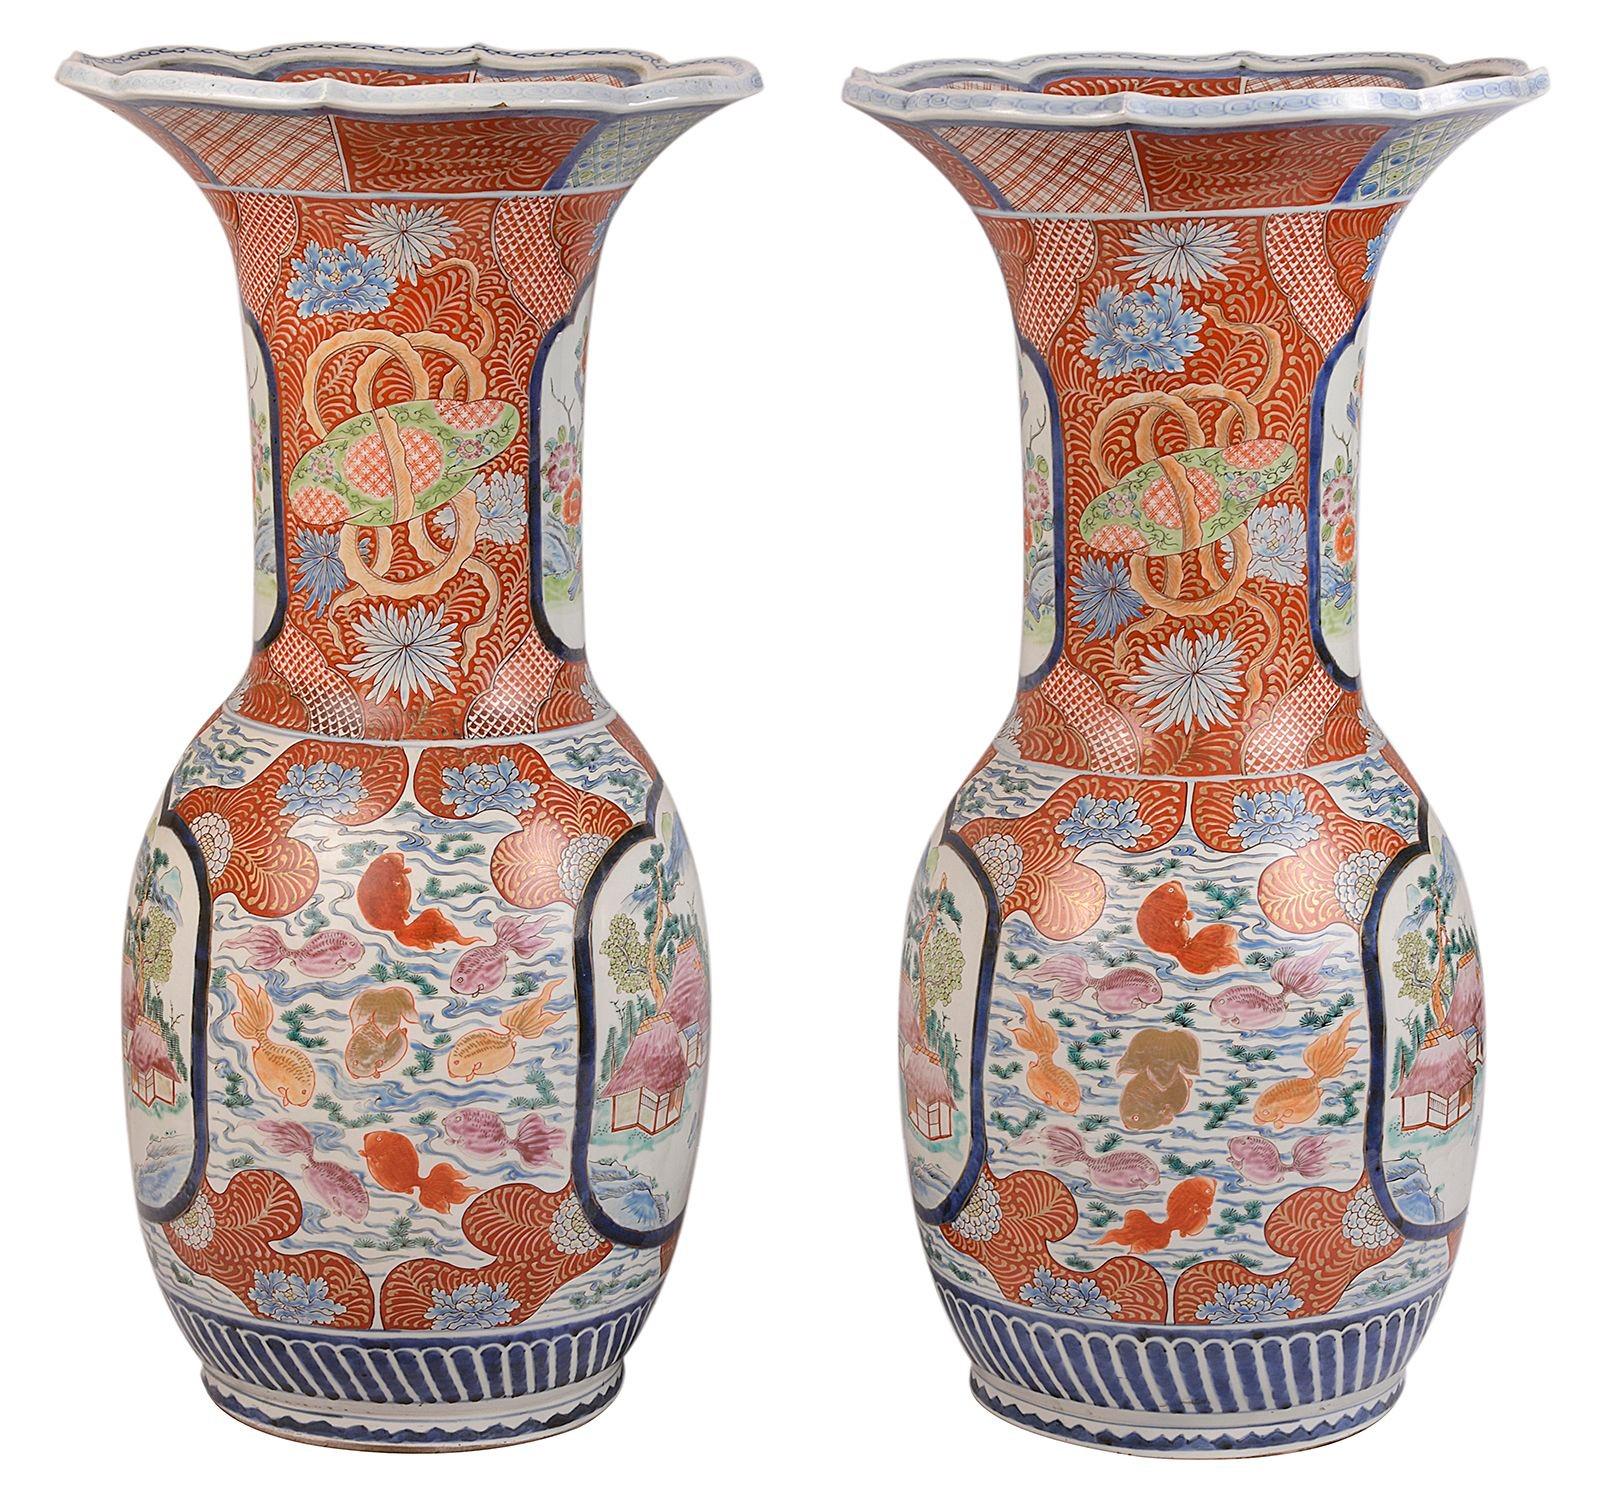 An impressive pair of late 19th century Japanese Kutani flare neck vases, circa 1890. Each with bold orange colouring to the classical motif decoration and inset hand painted panes depicting mountainous scenes with buildings among trees.
Signed to